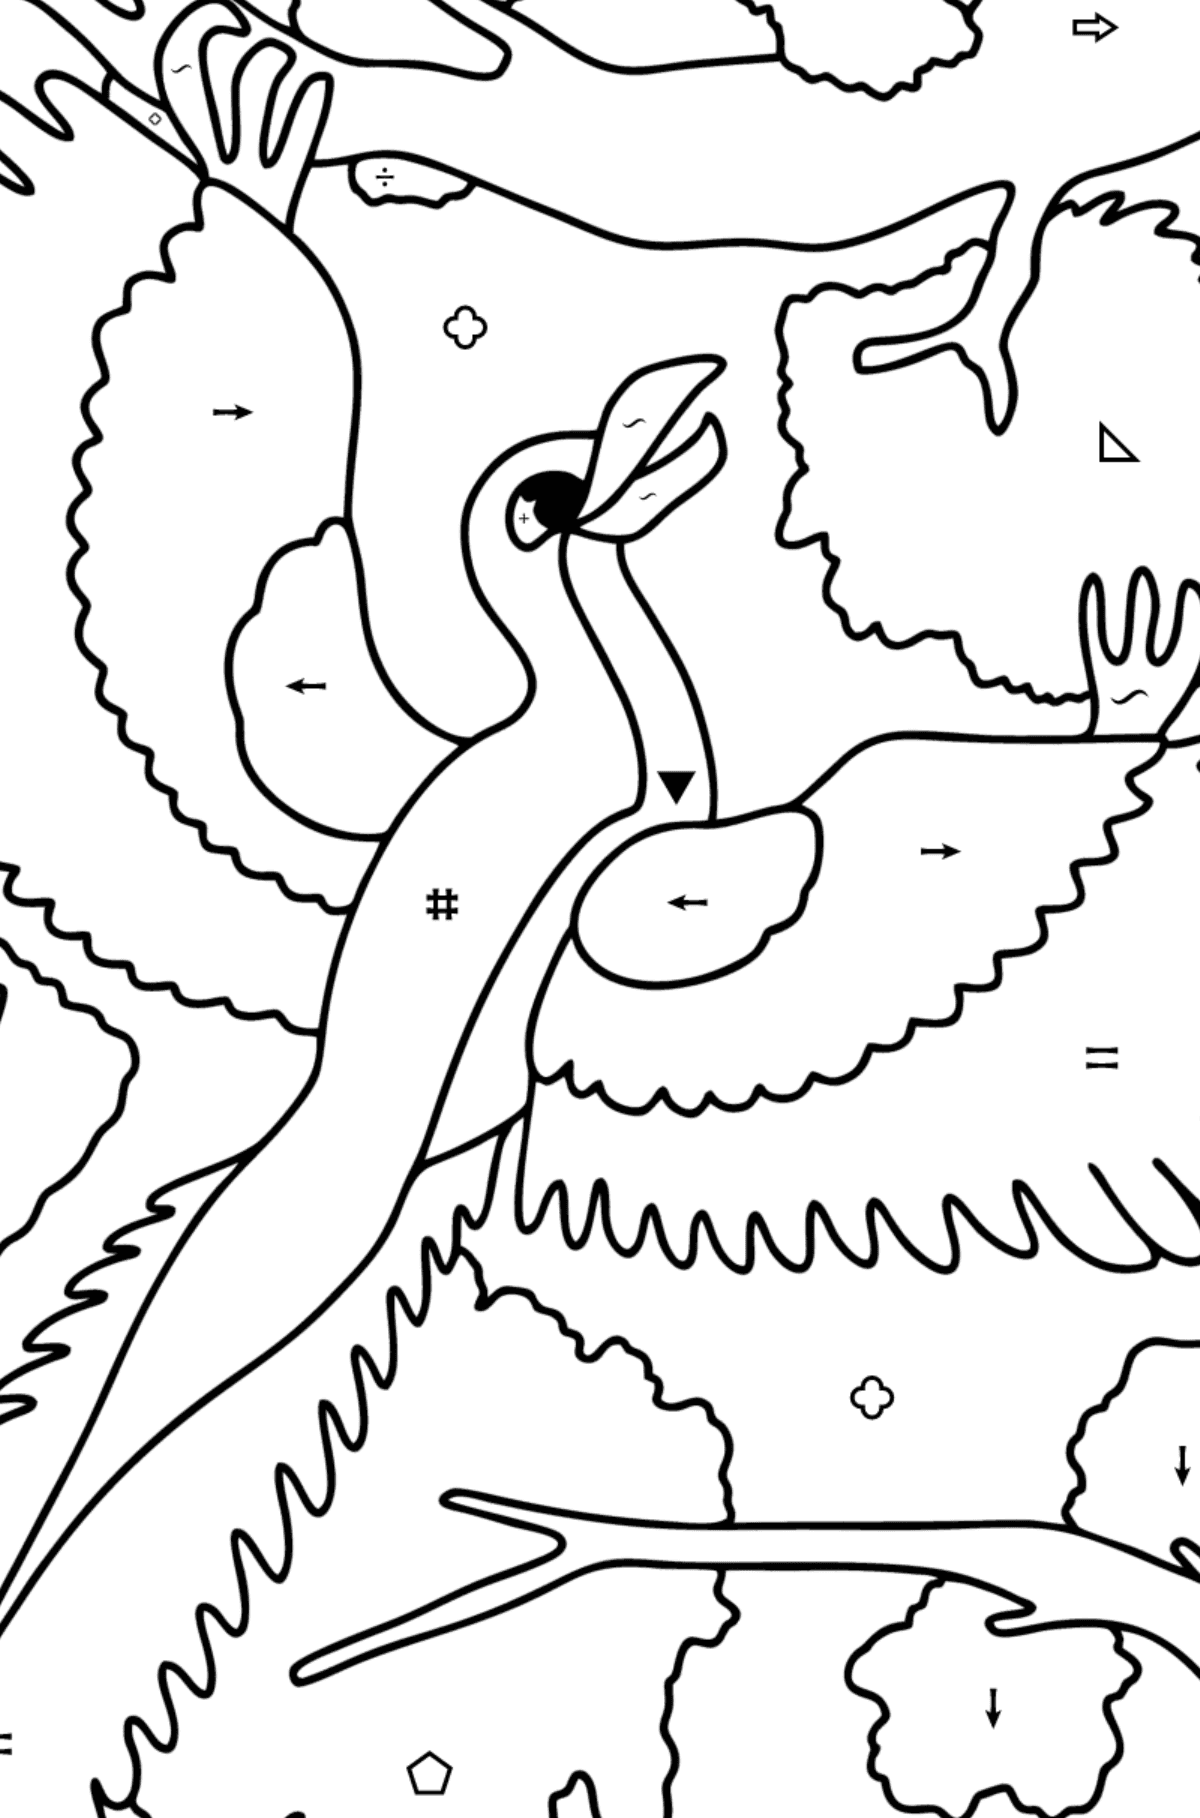 Archeopteryx coloring page - Coloring by Symbols and Geometric Shapes for Kids